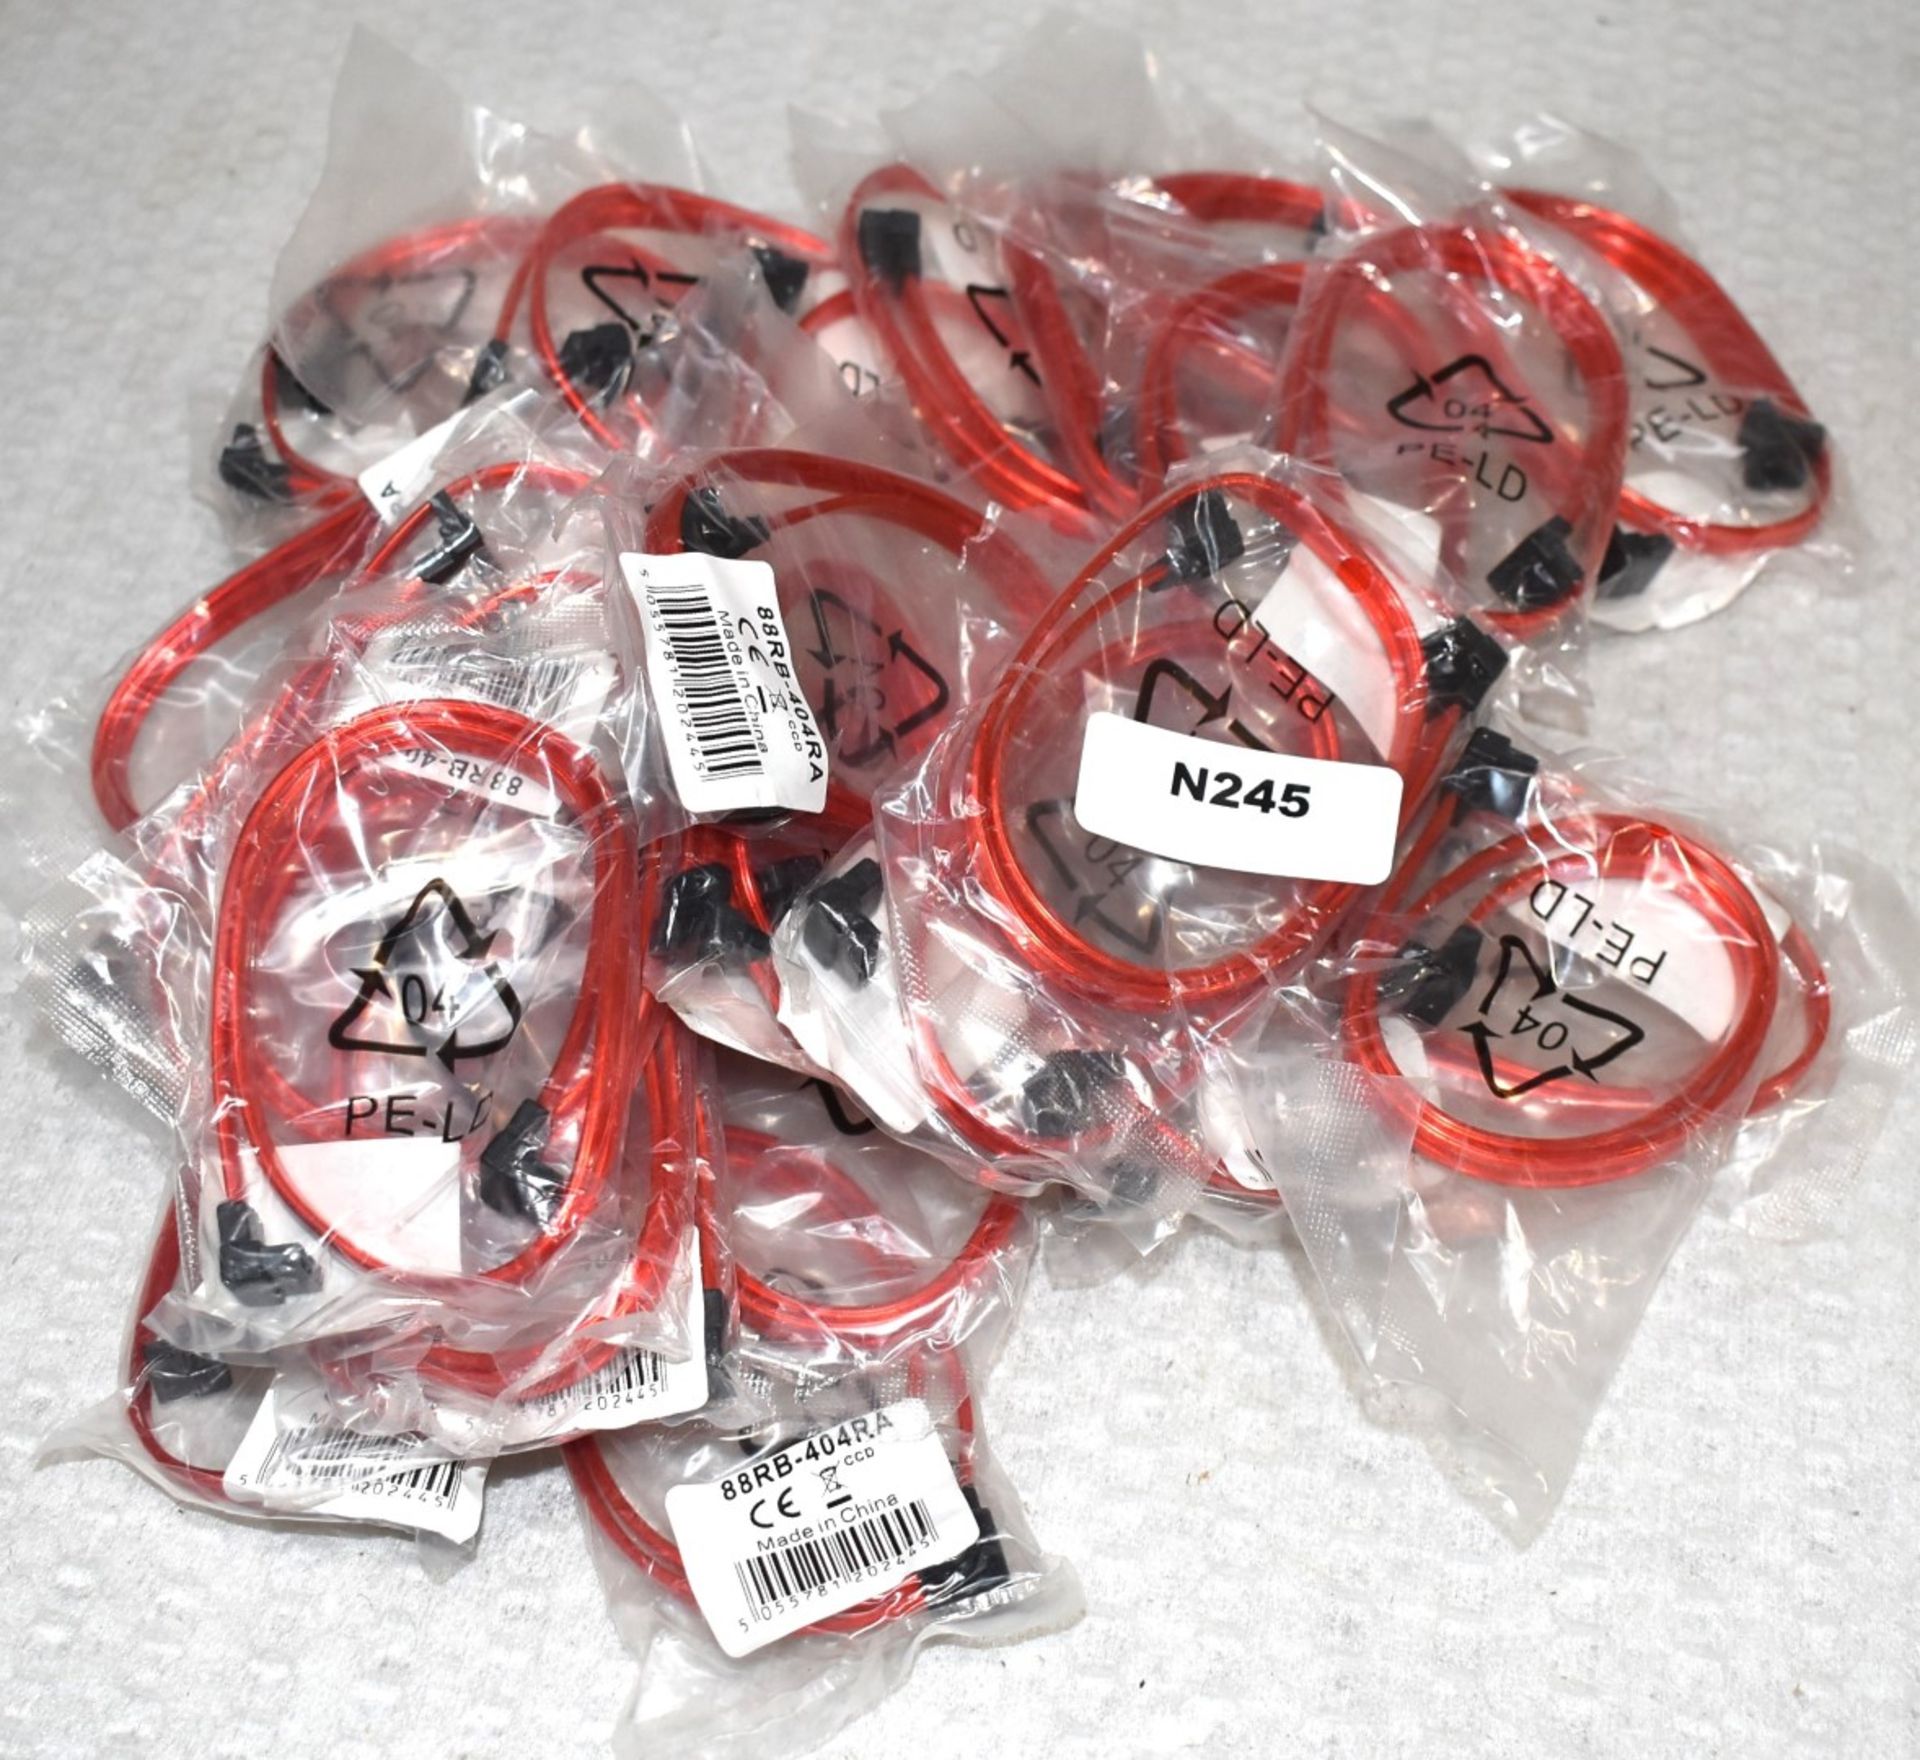 30 x Red SATA Hard Drive Cables - New in Packets - Image 4 of 4